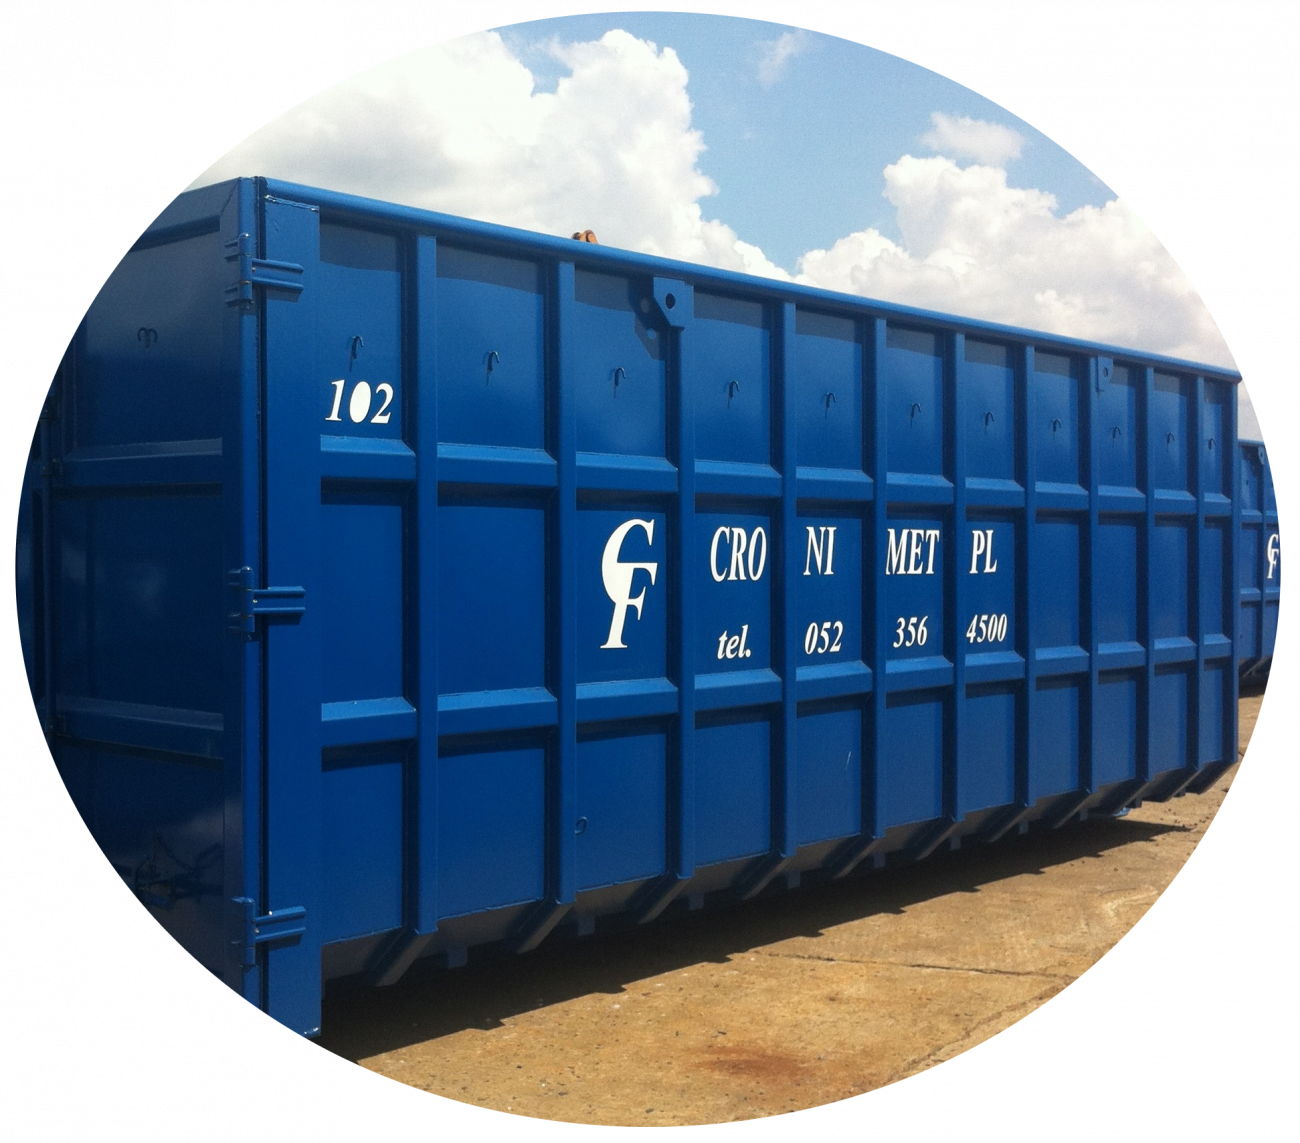 Blue container in a round image